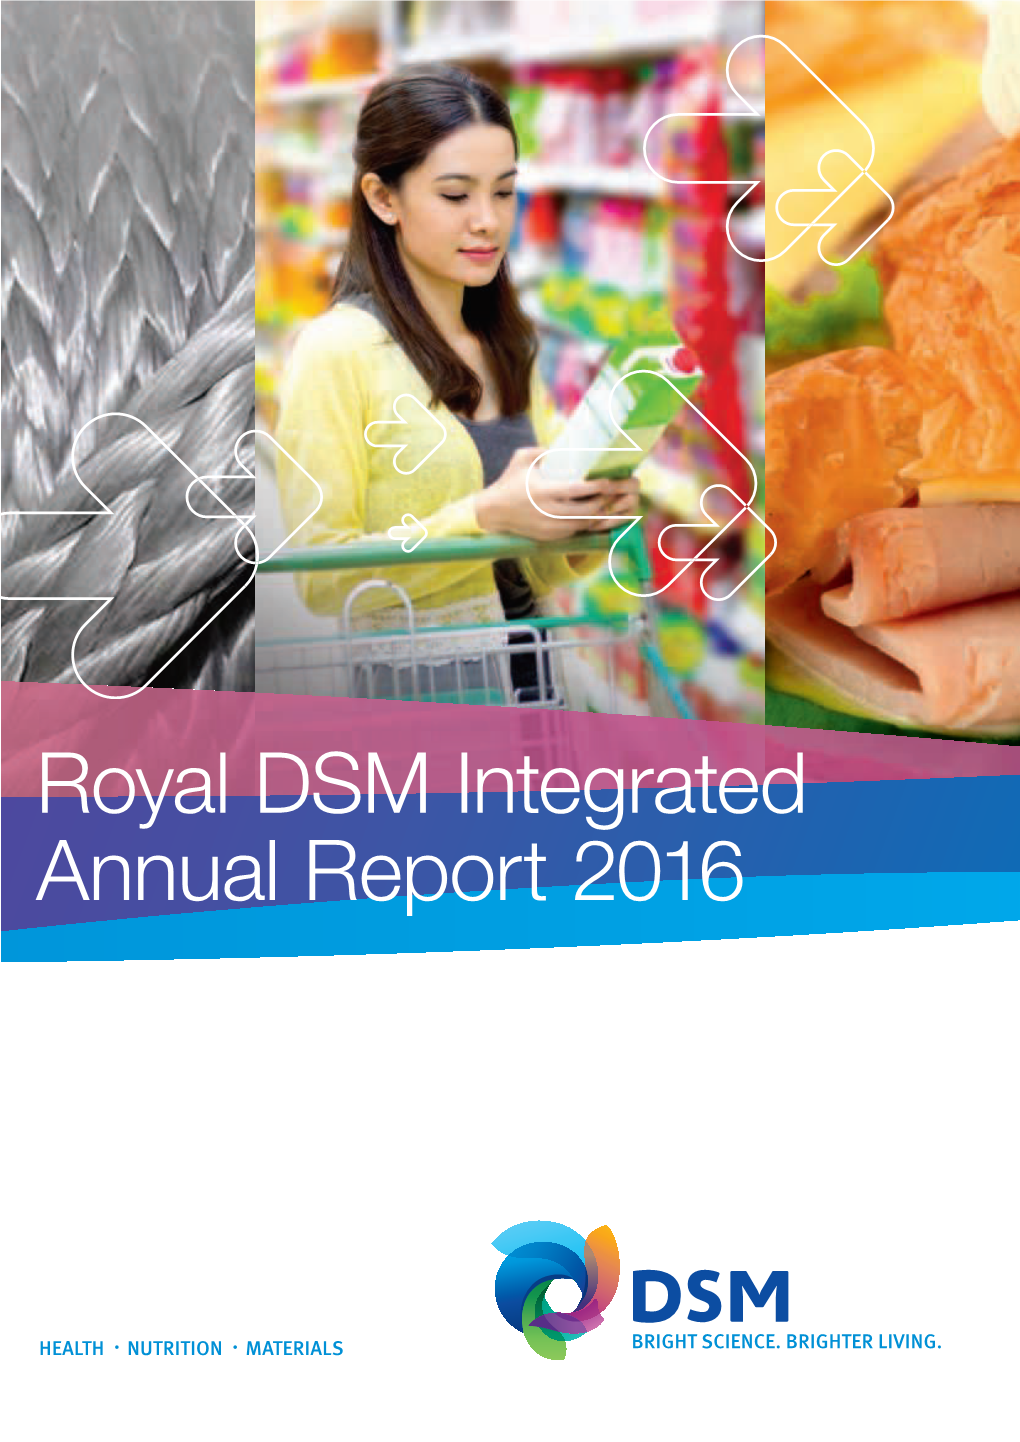 Royal DSM Integrated Annual Report 2016